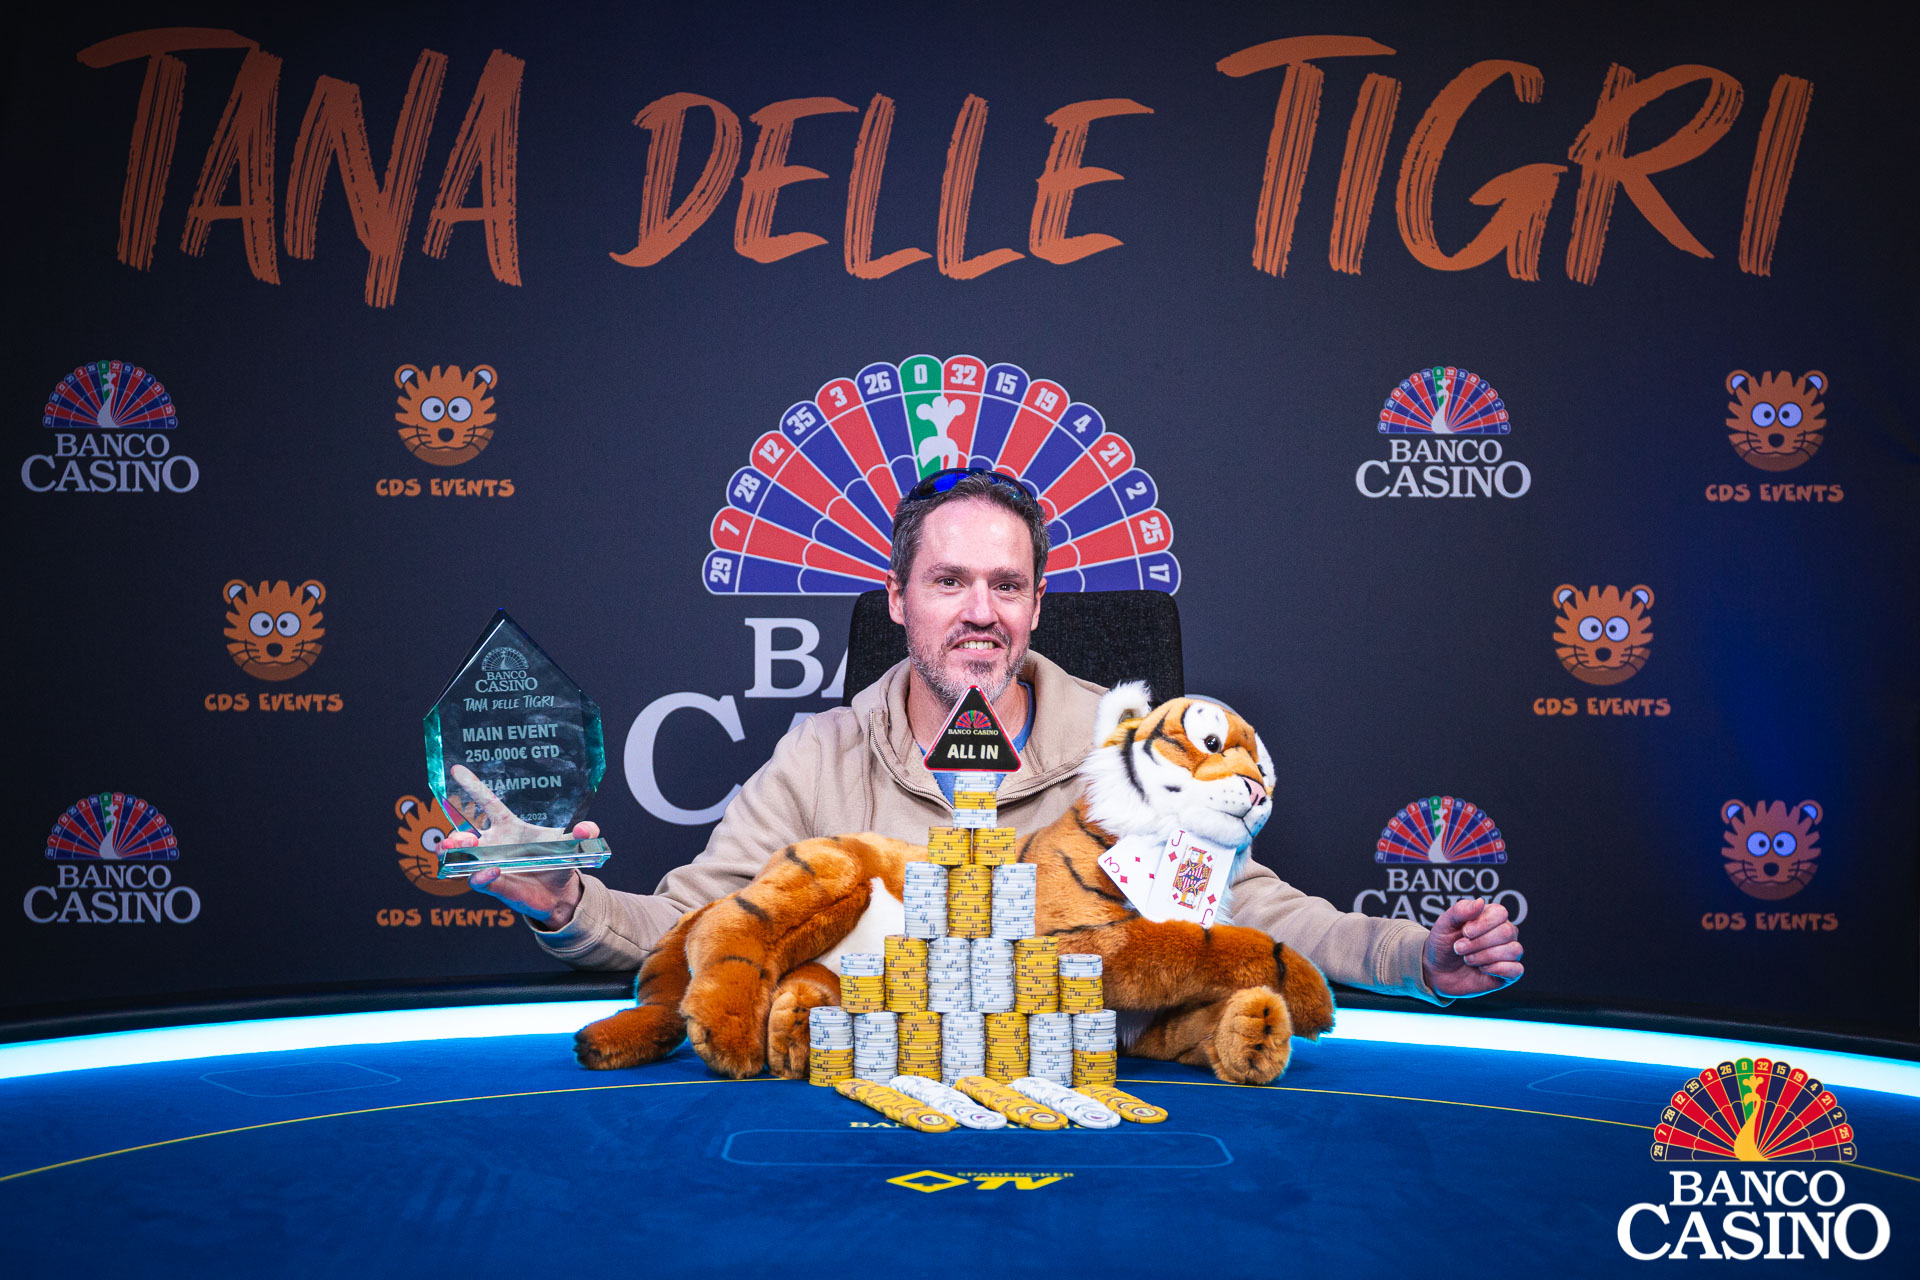 GANI WEISS BECAME CHAMPION OF ITALIAN TANA DELLE TIGRI AND TAKES 27,000€ FROM BANCO CASINO!